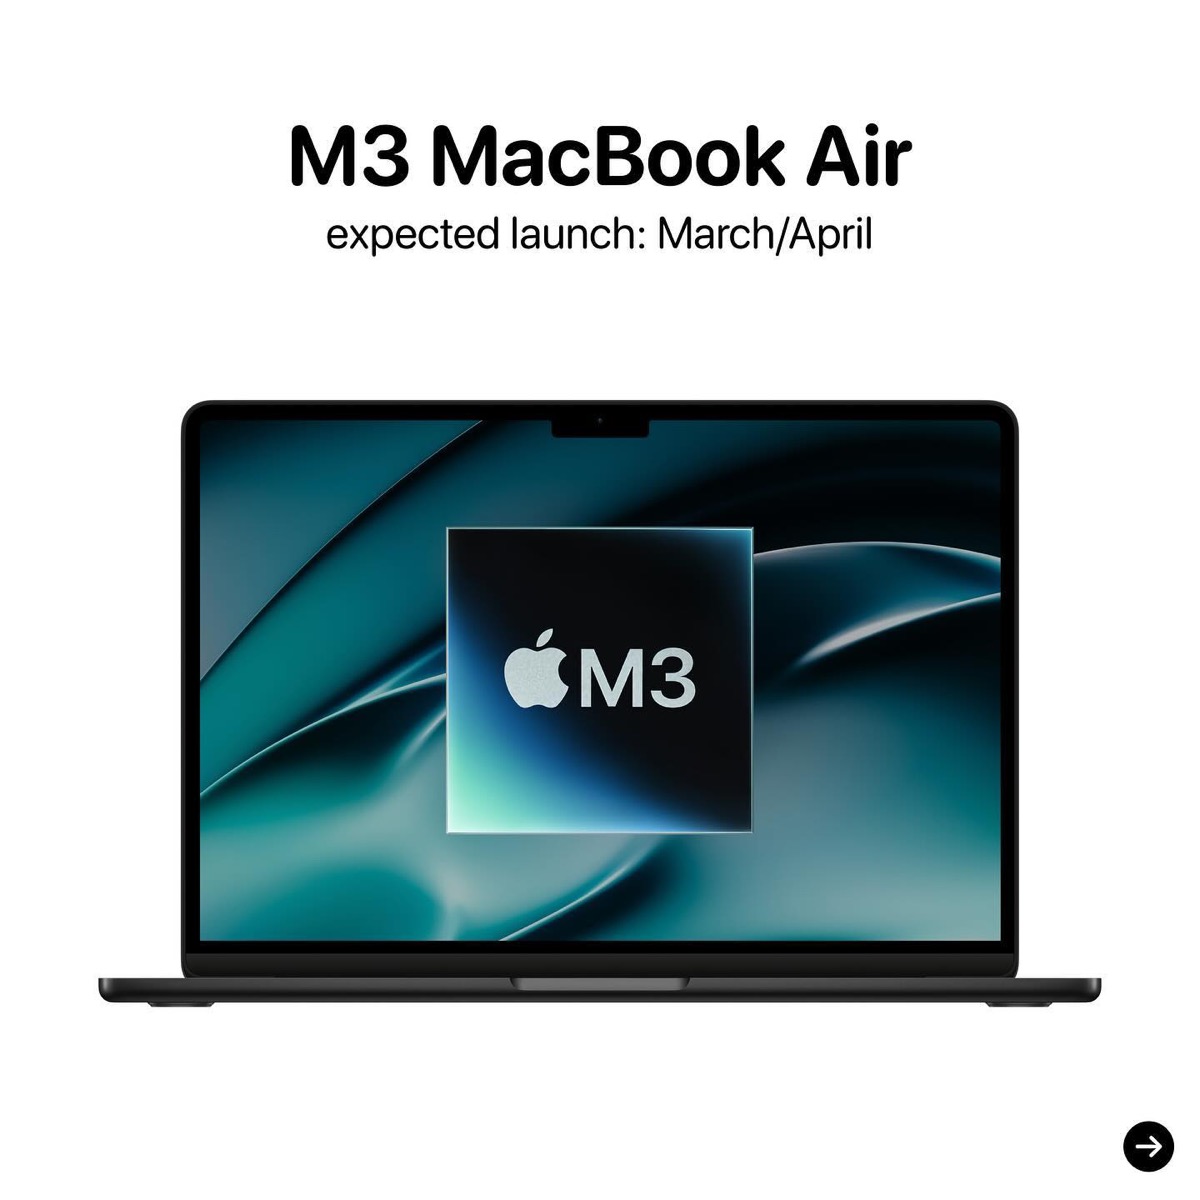 When will the M3 MacBook Air be released? Expected dates and specs